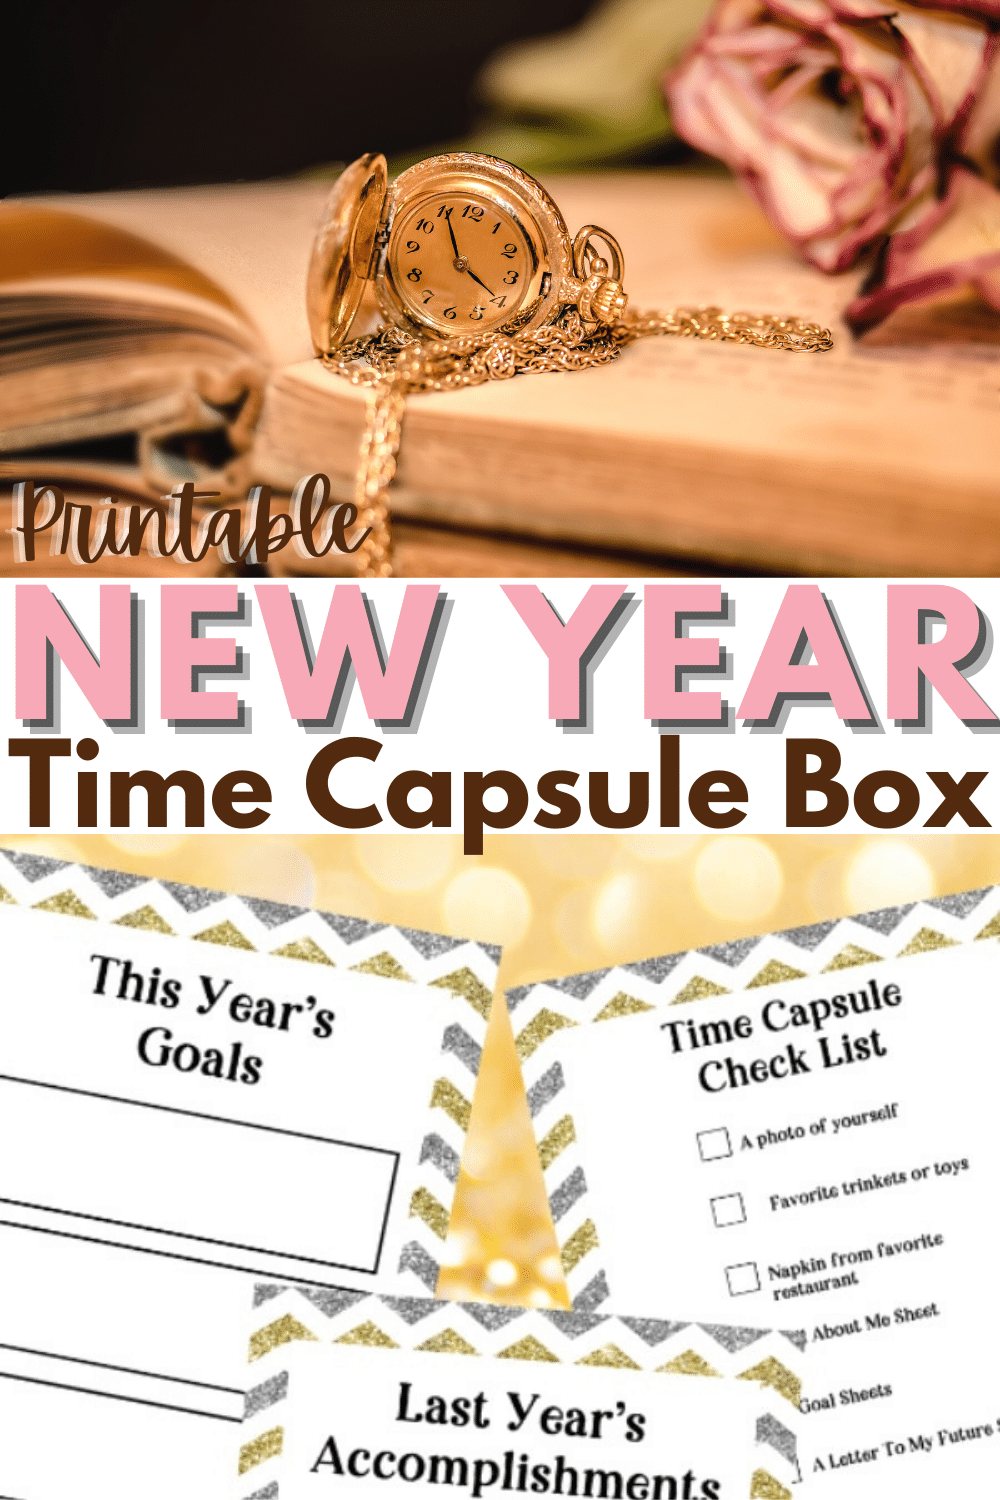 A New Year Time Capsule Box is a great family activity and tradition to start. These free time capsule box printables make it fun and easy to do. #printables #newyearseve #timecapsule via @wondermomwannab